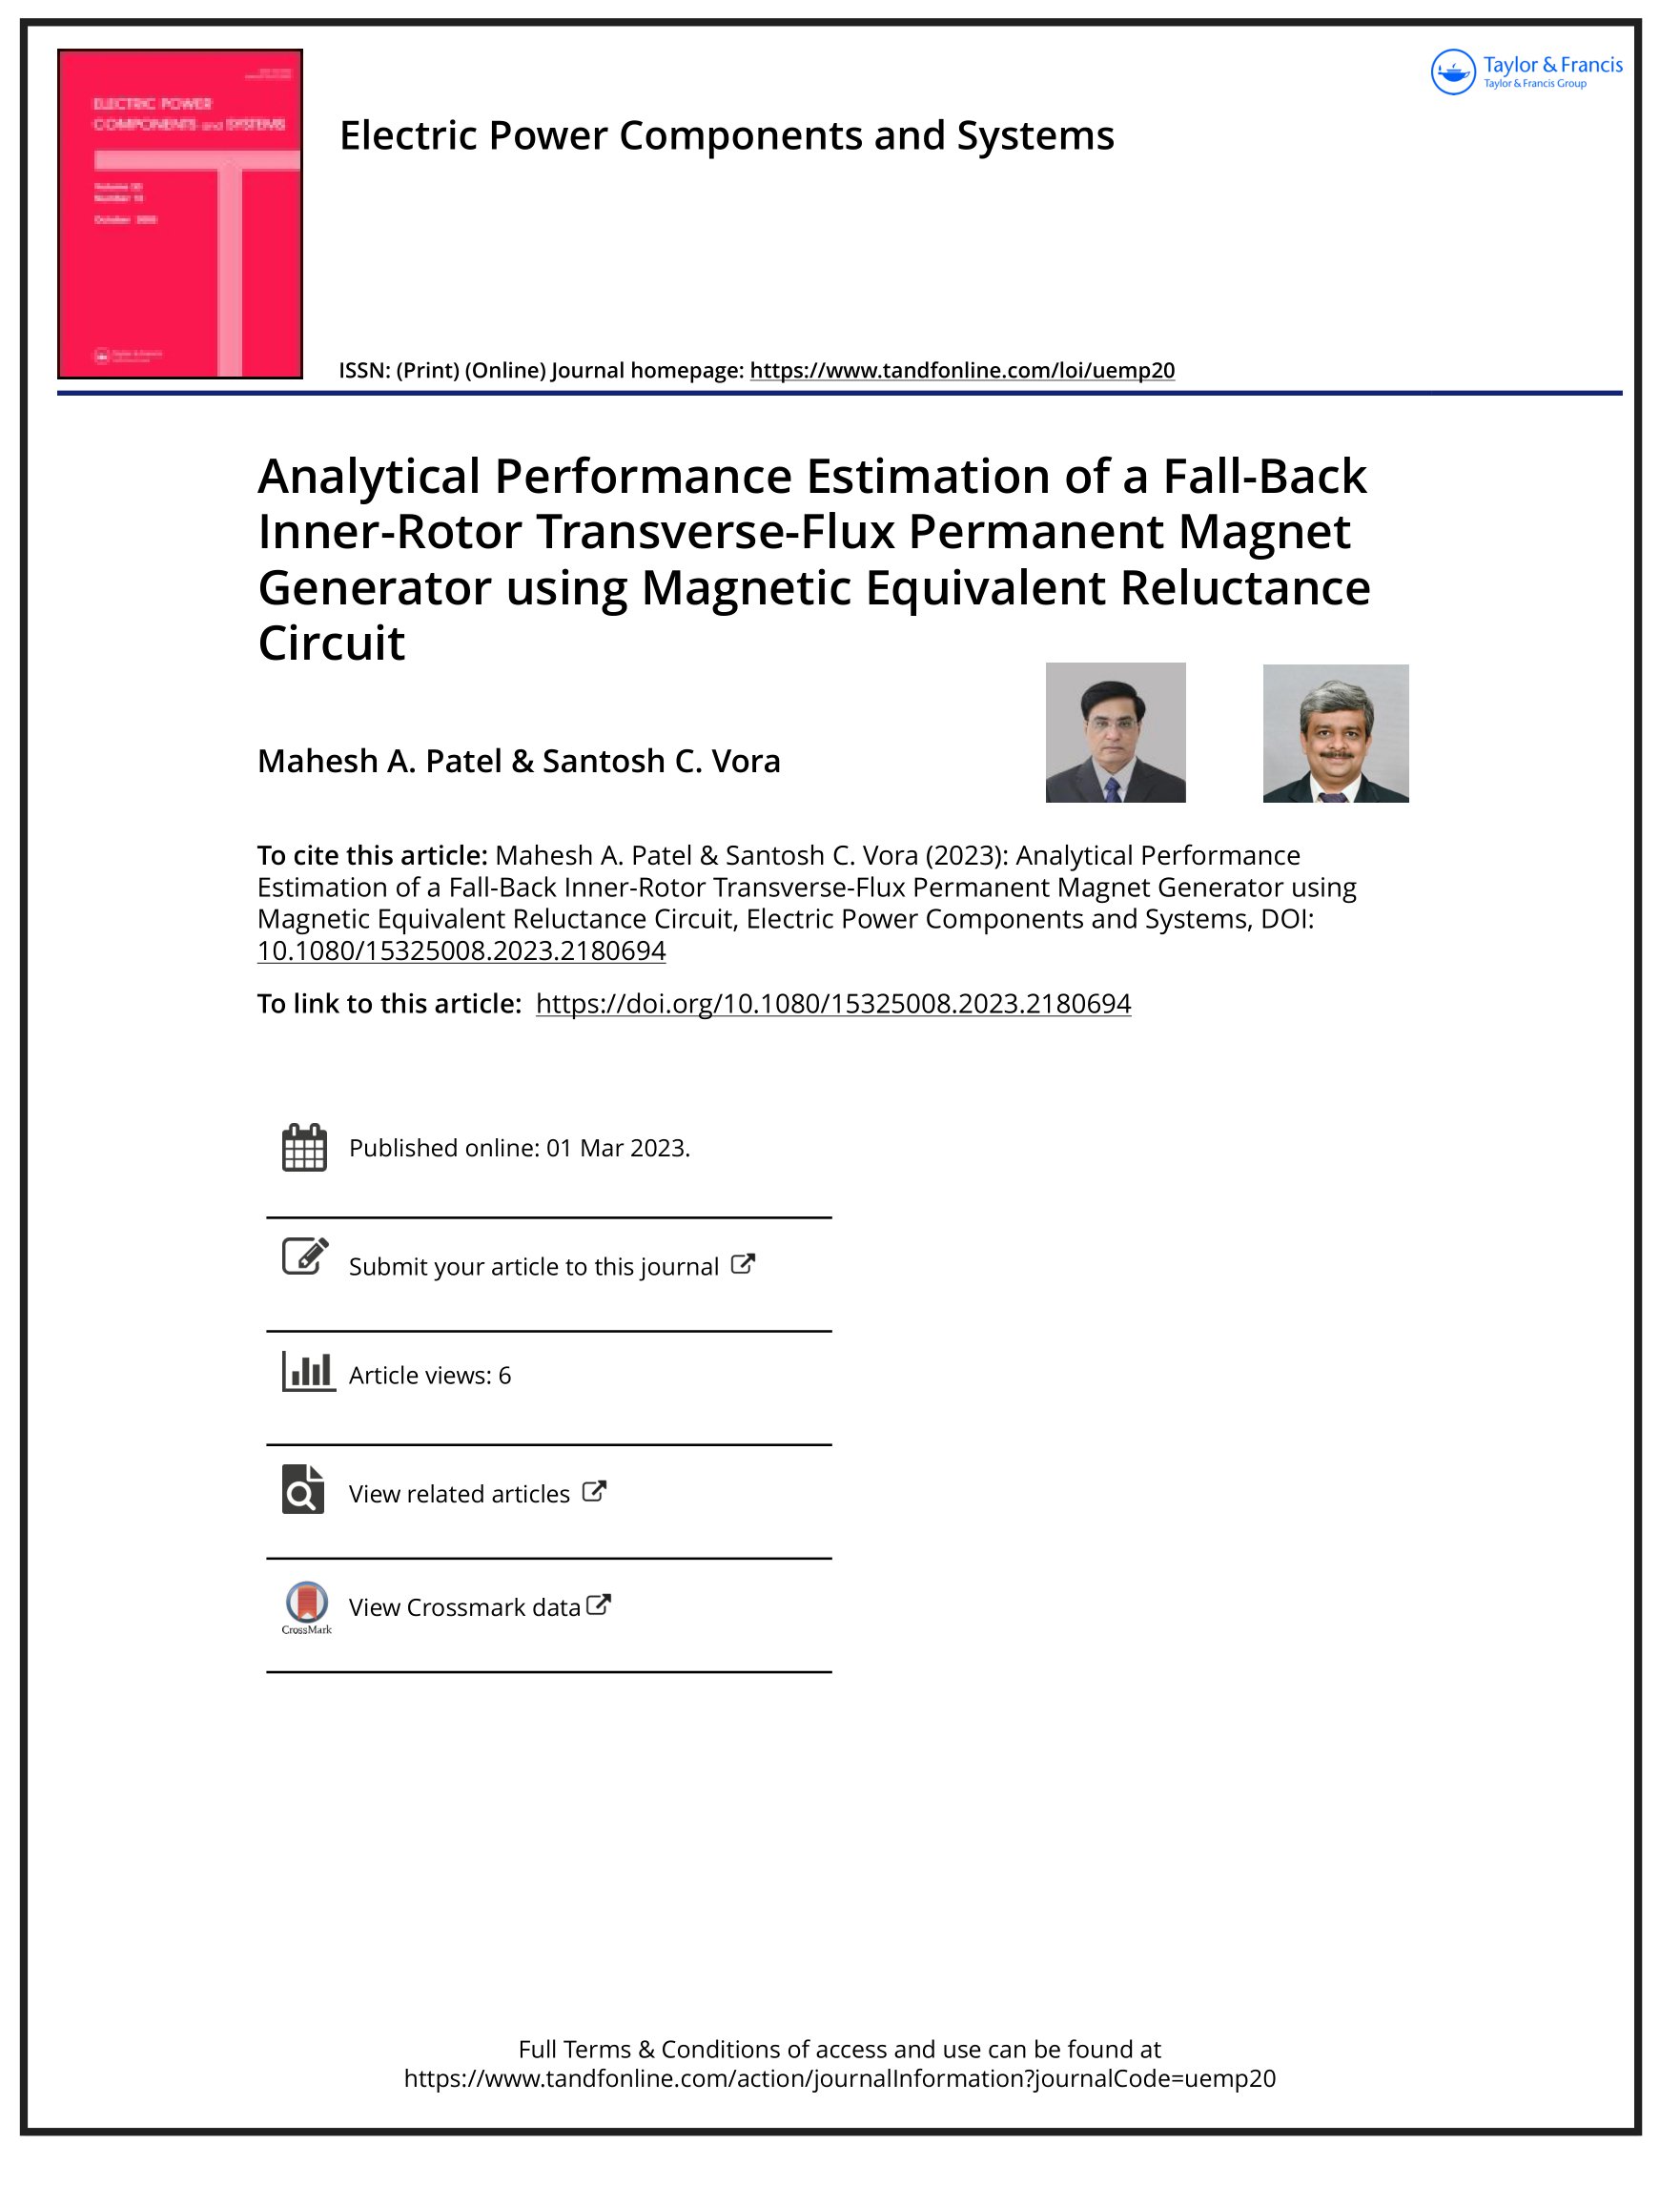 Analytical performance estimation of a fall-backinner-rotor transverse-flux permanent magnet generator using magnetic equivalent reluctance circuit